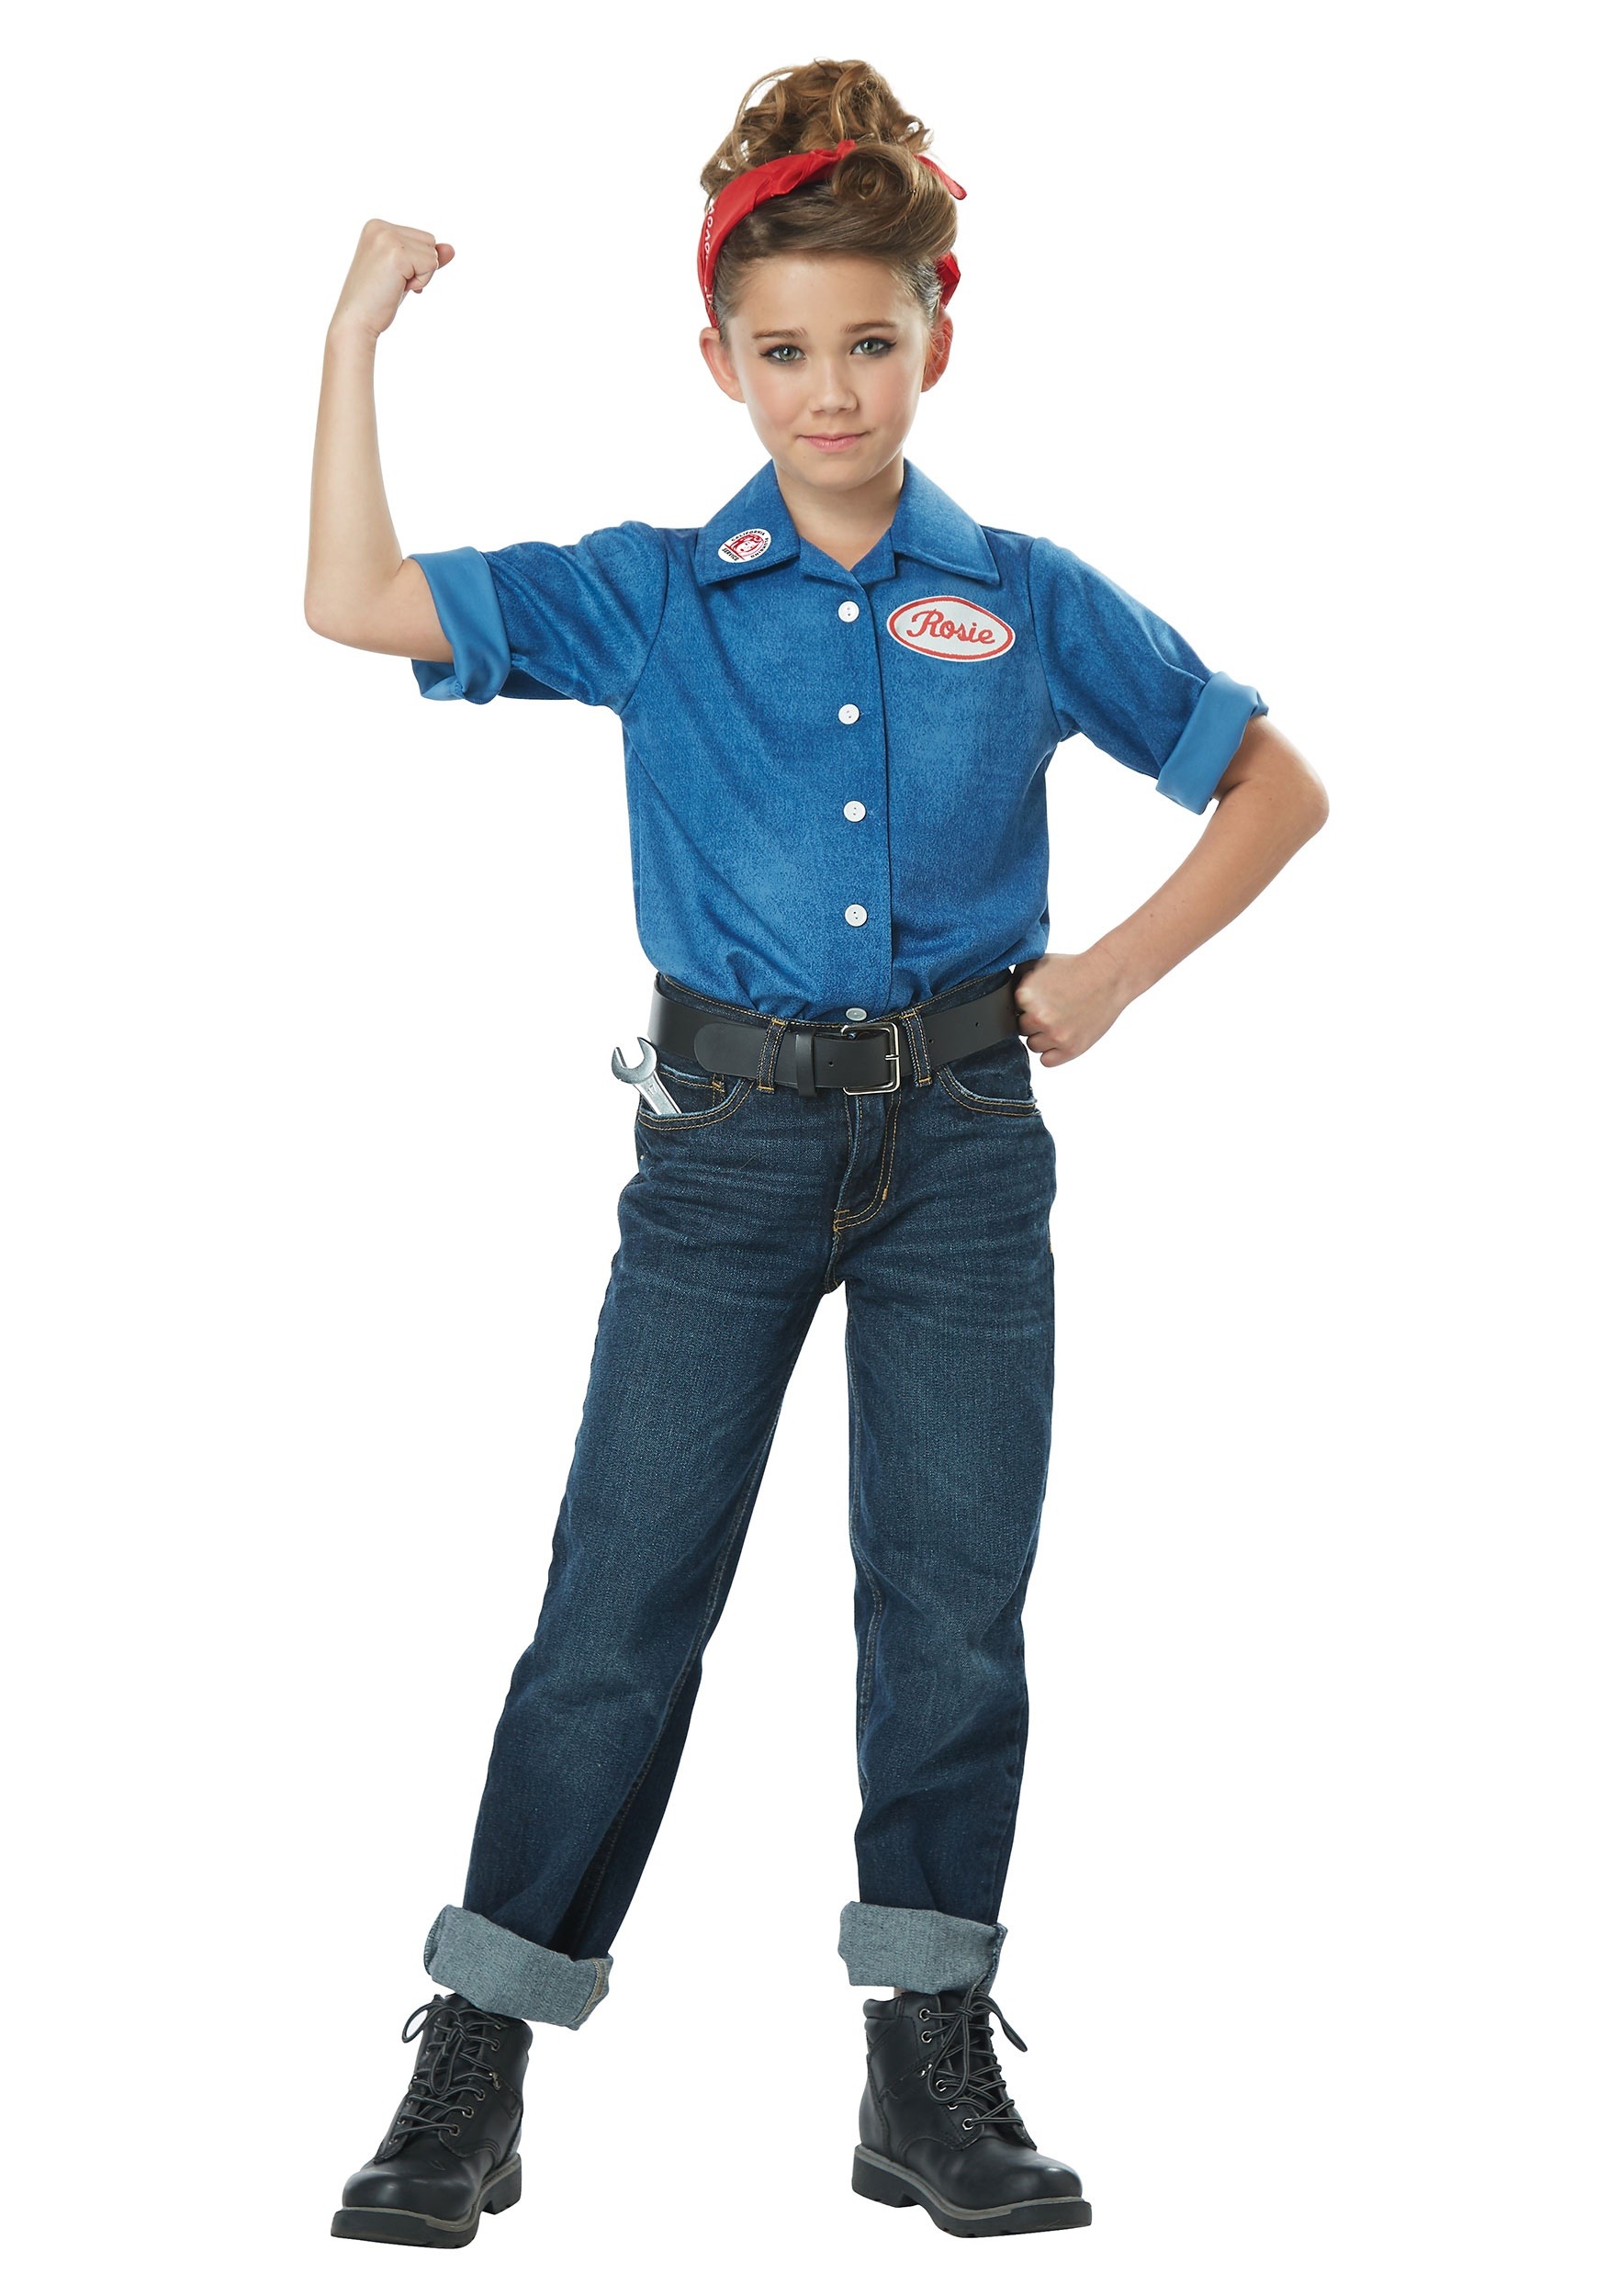 Rosie the Riveter Costume - Complete Guide - USA Jacket